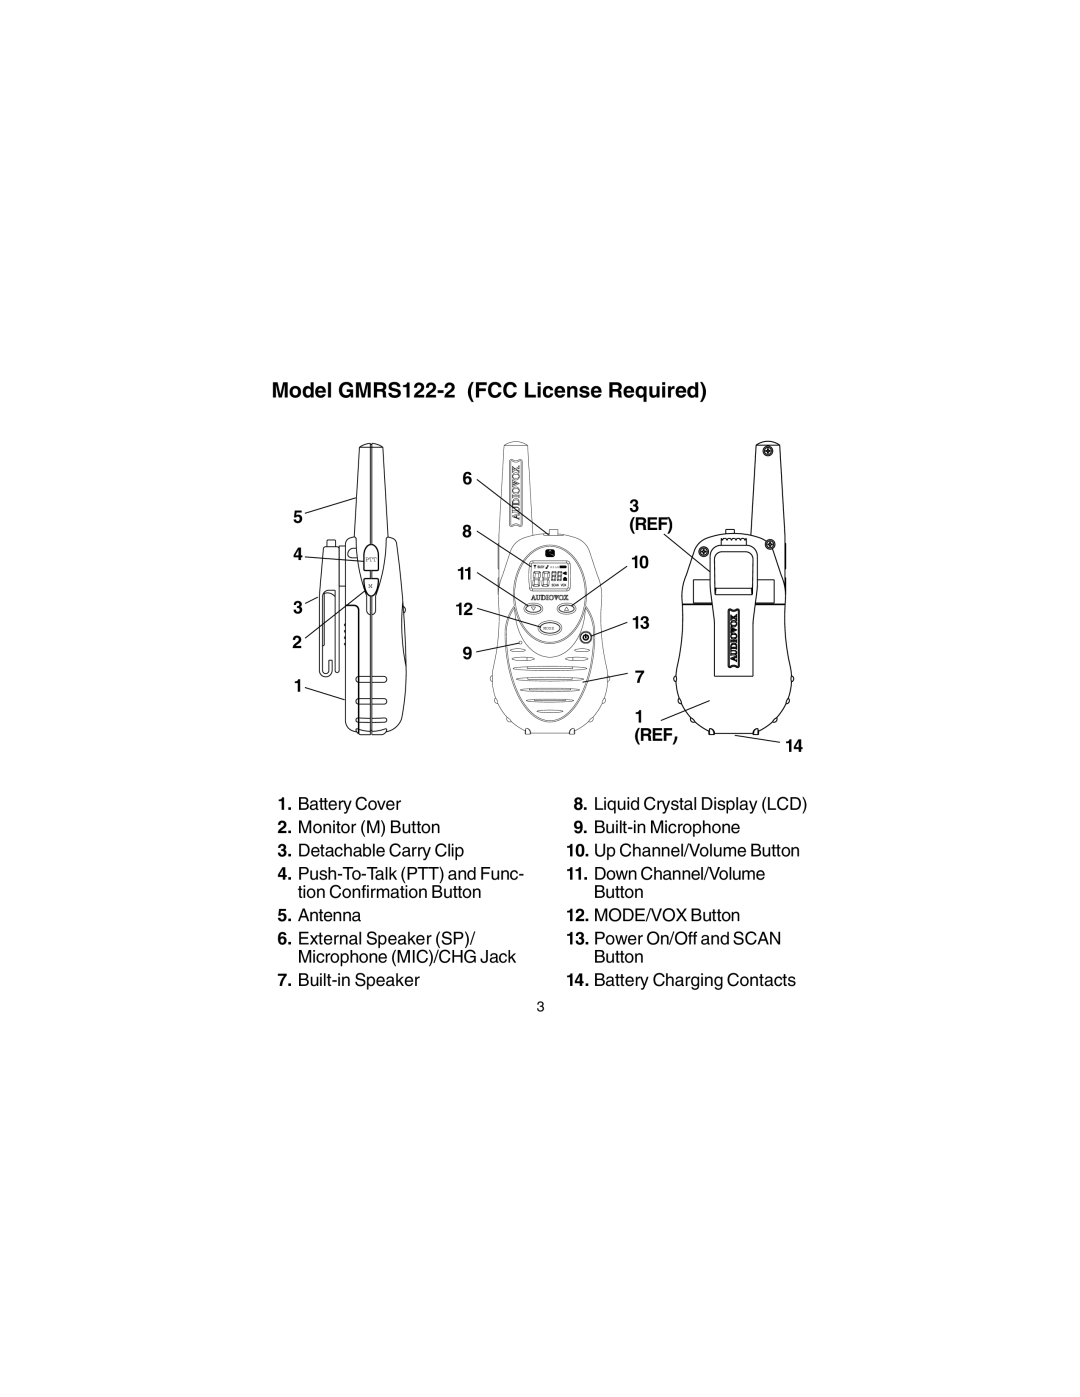 Audiovox manual Model GMRS122-2 FCC License Required 